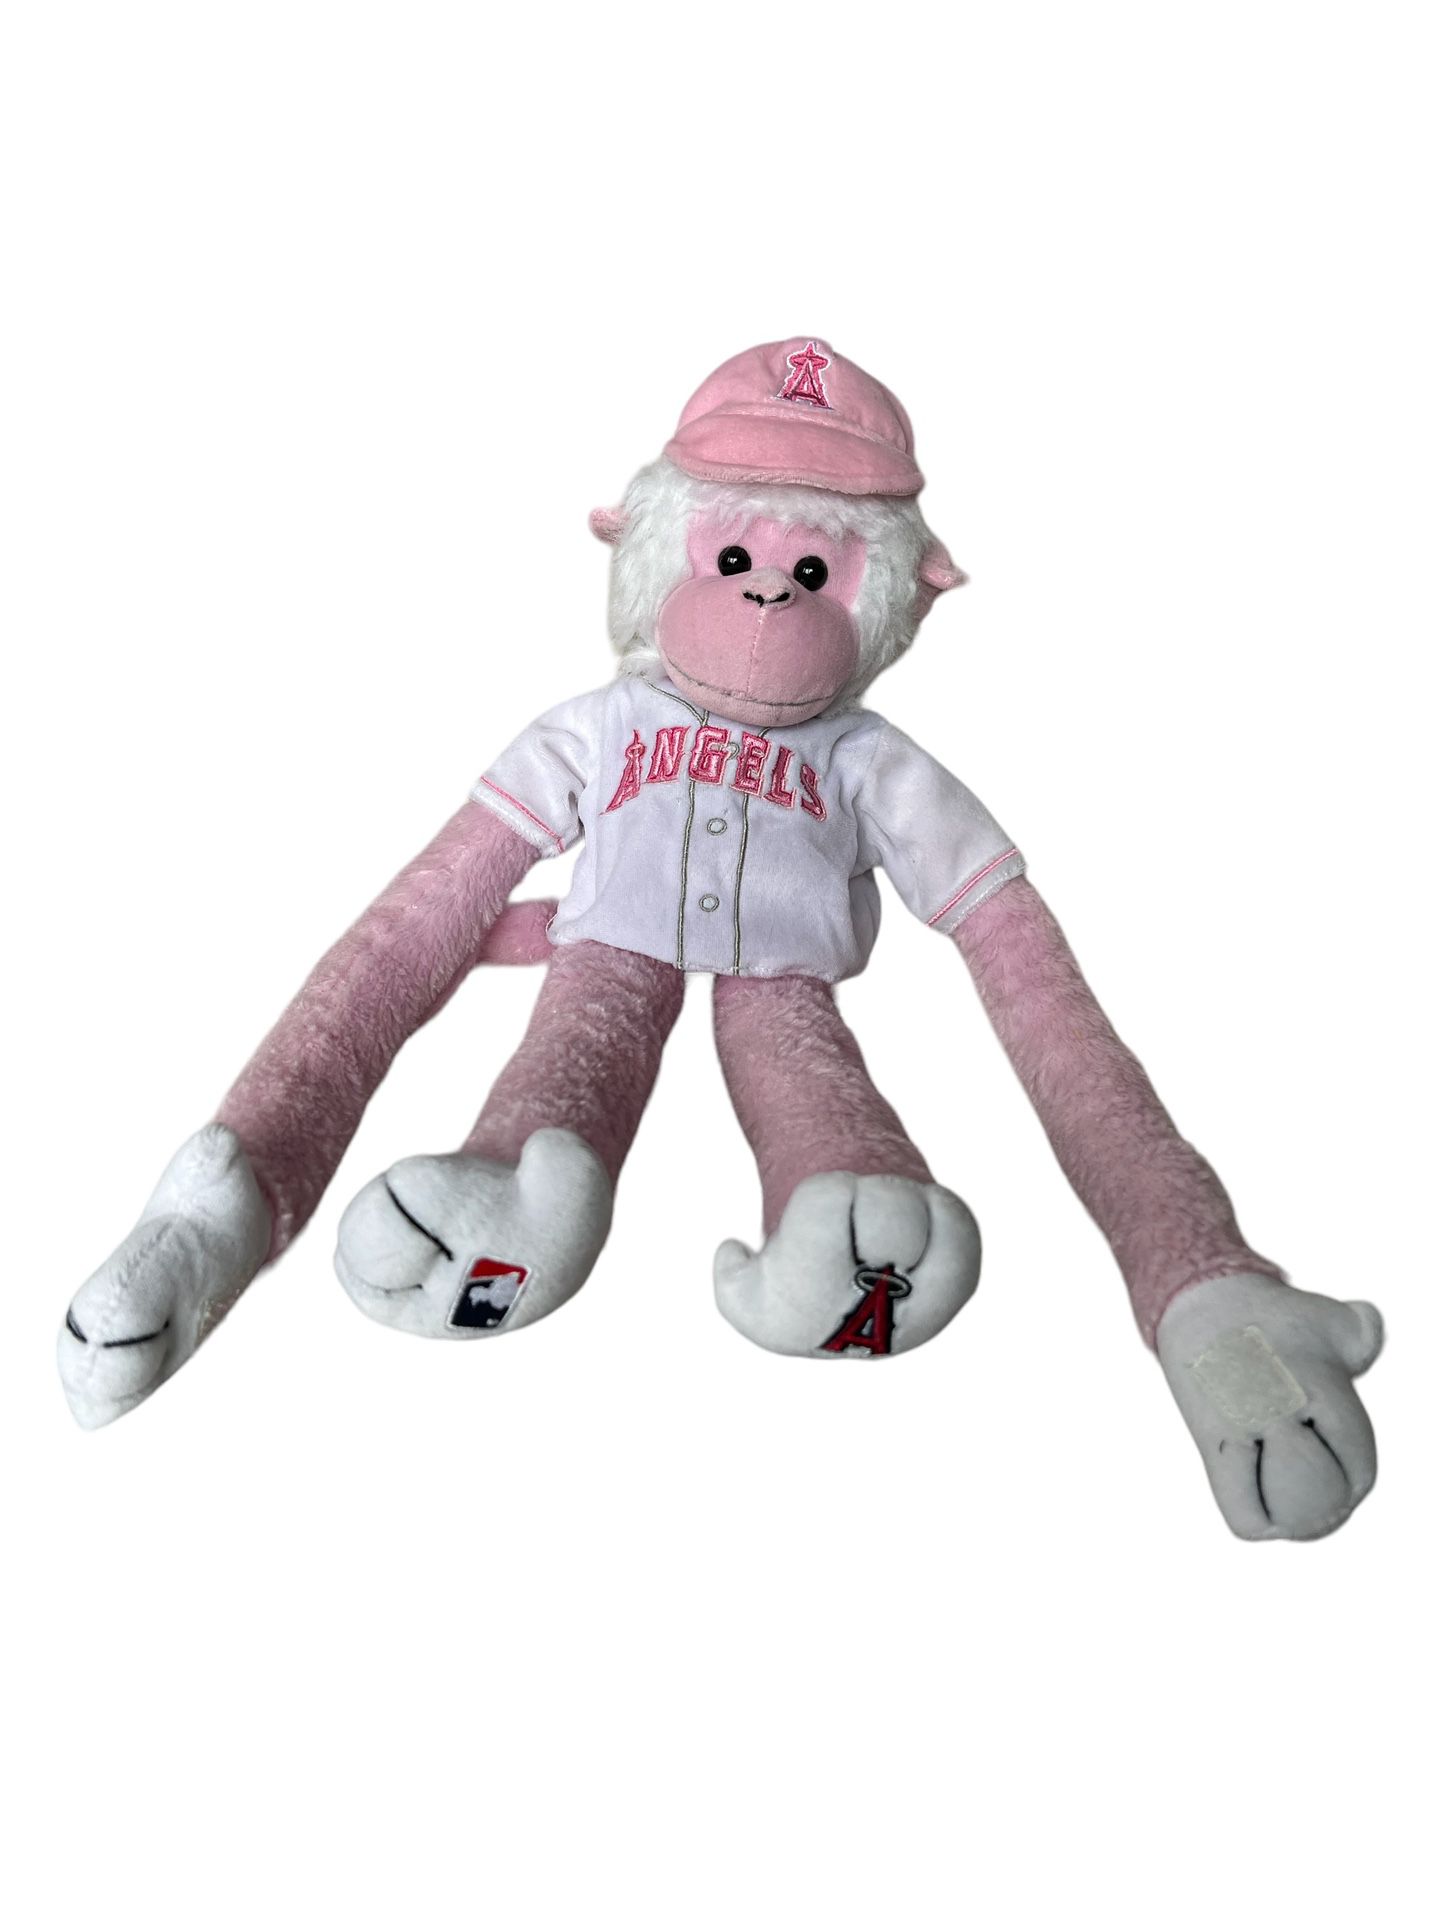 Best Pink Angels Rally Monkey for sale in Irvine, California for 2023